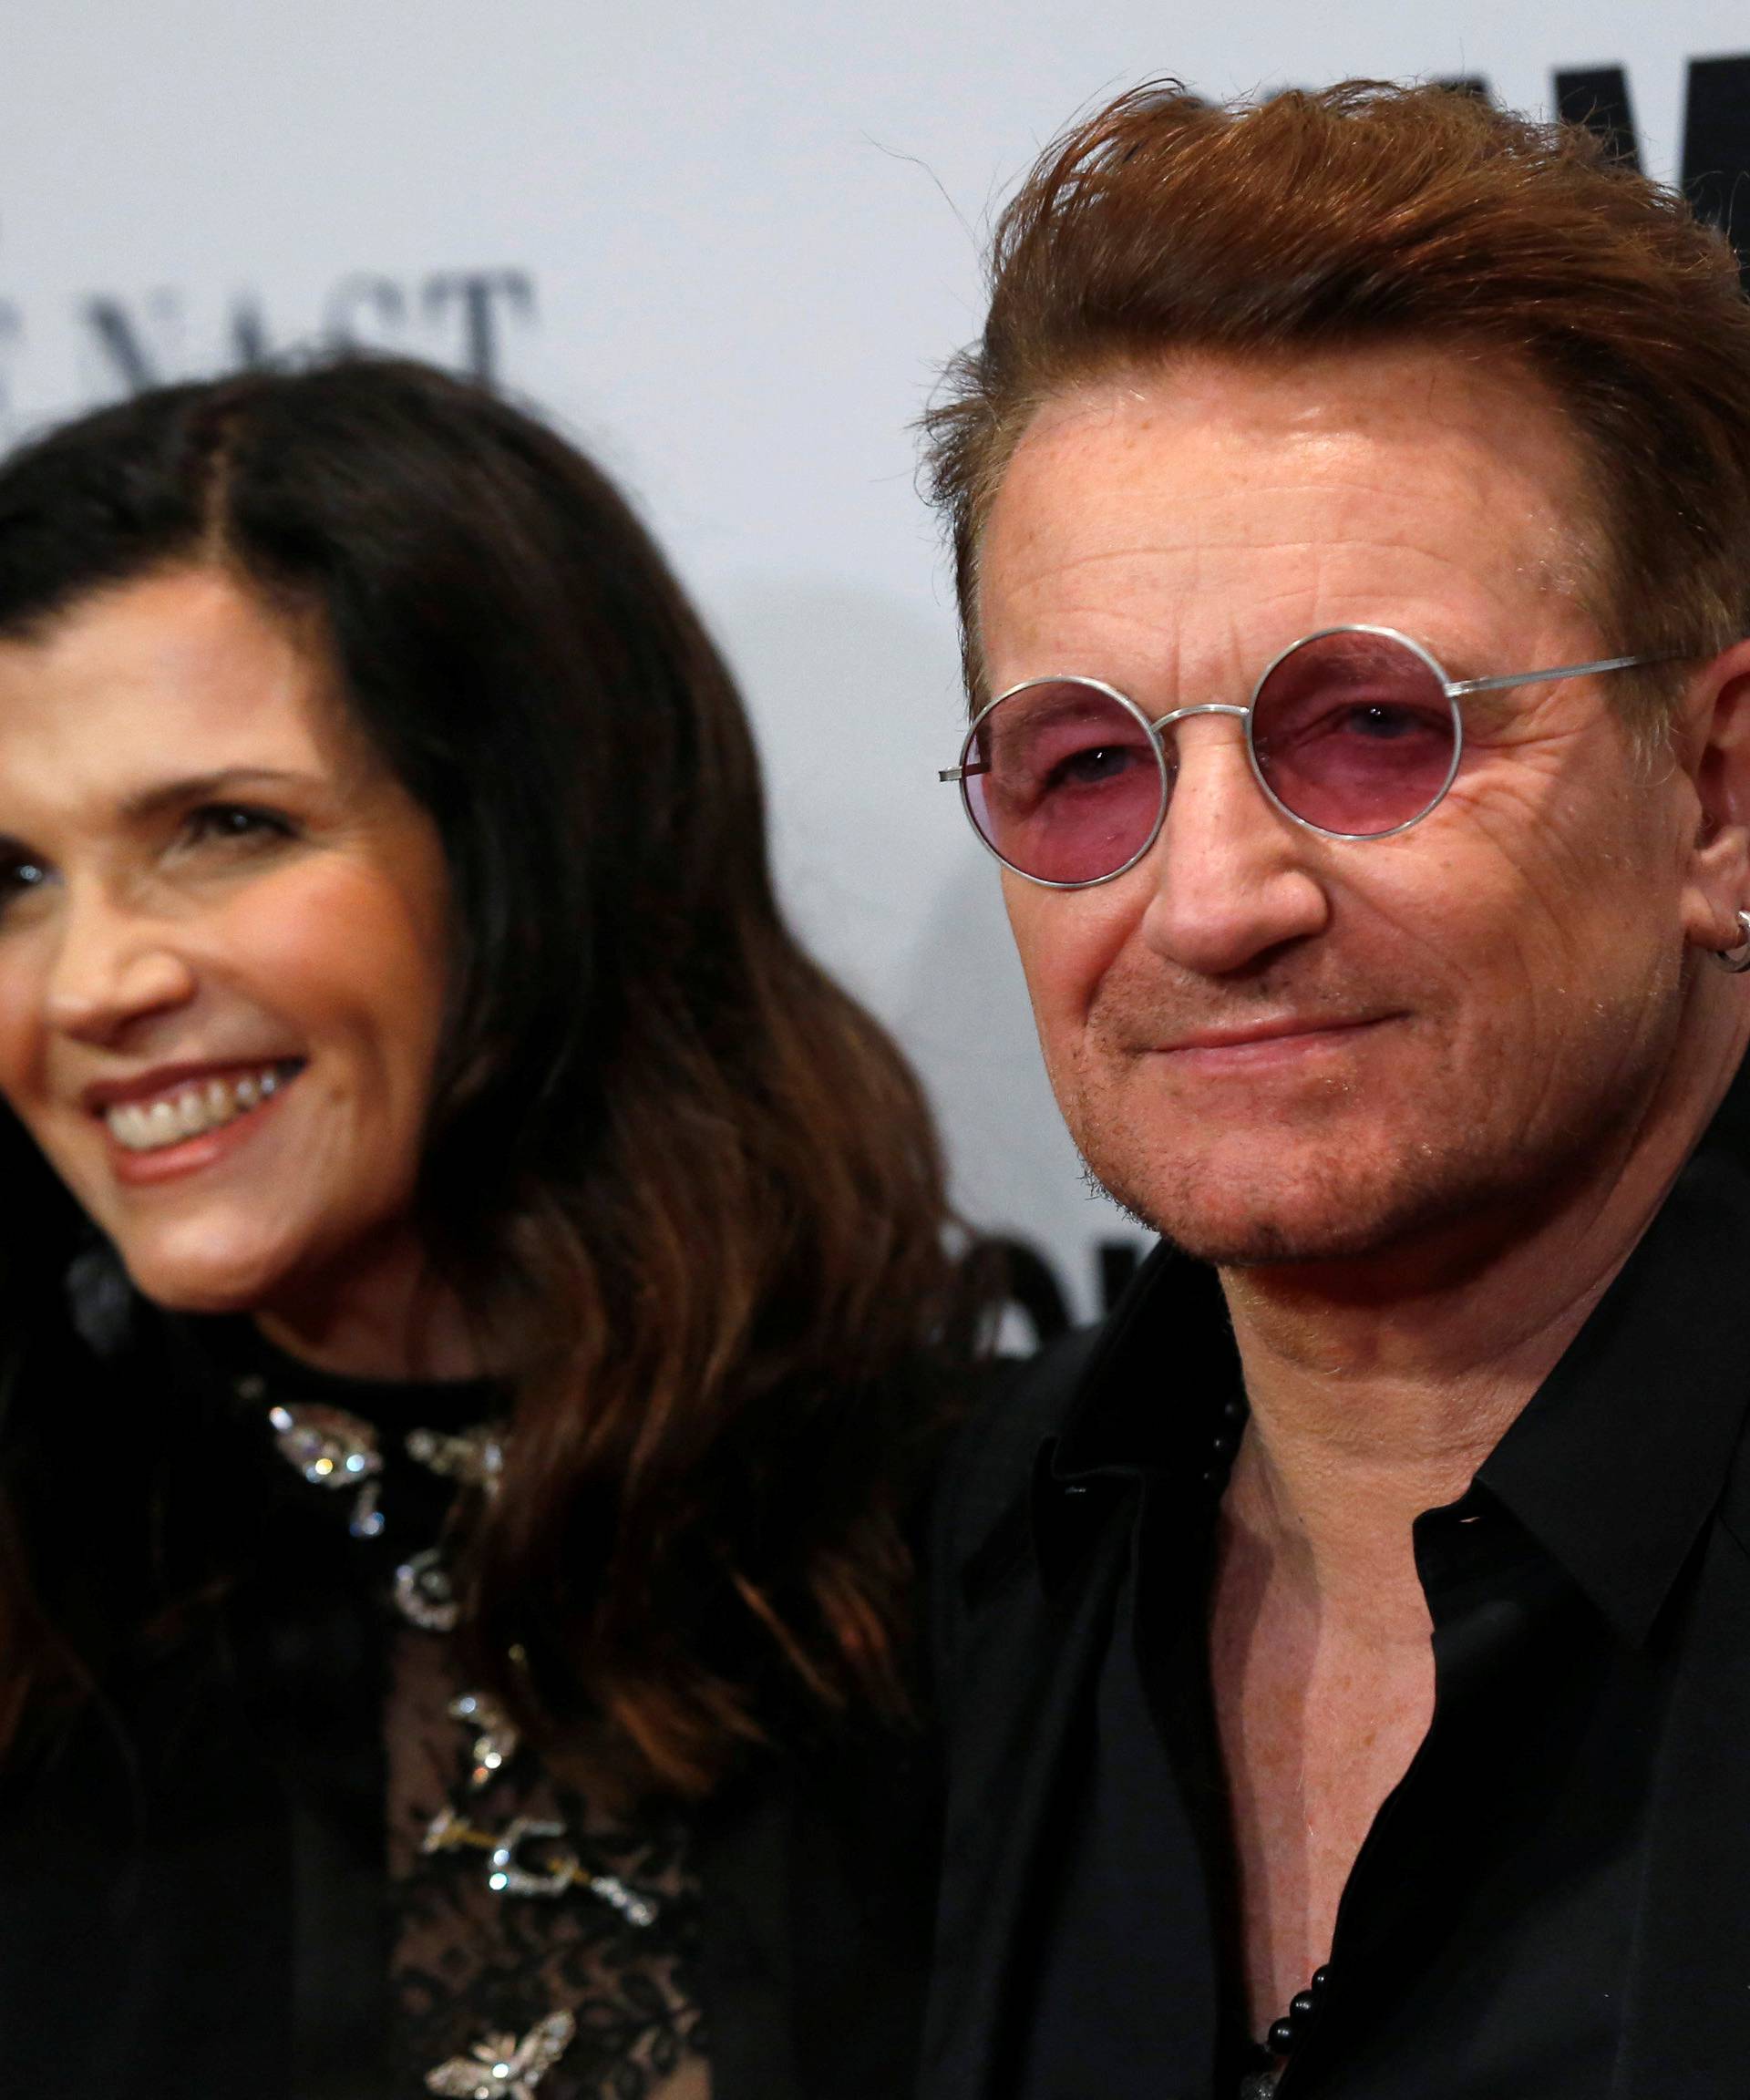 Recording artist and honoree Bono of U2 and his wife Ali Hewson pose at the Glamour Women of the Year Awards in Los Angeles